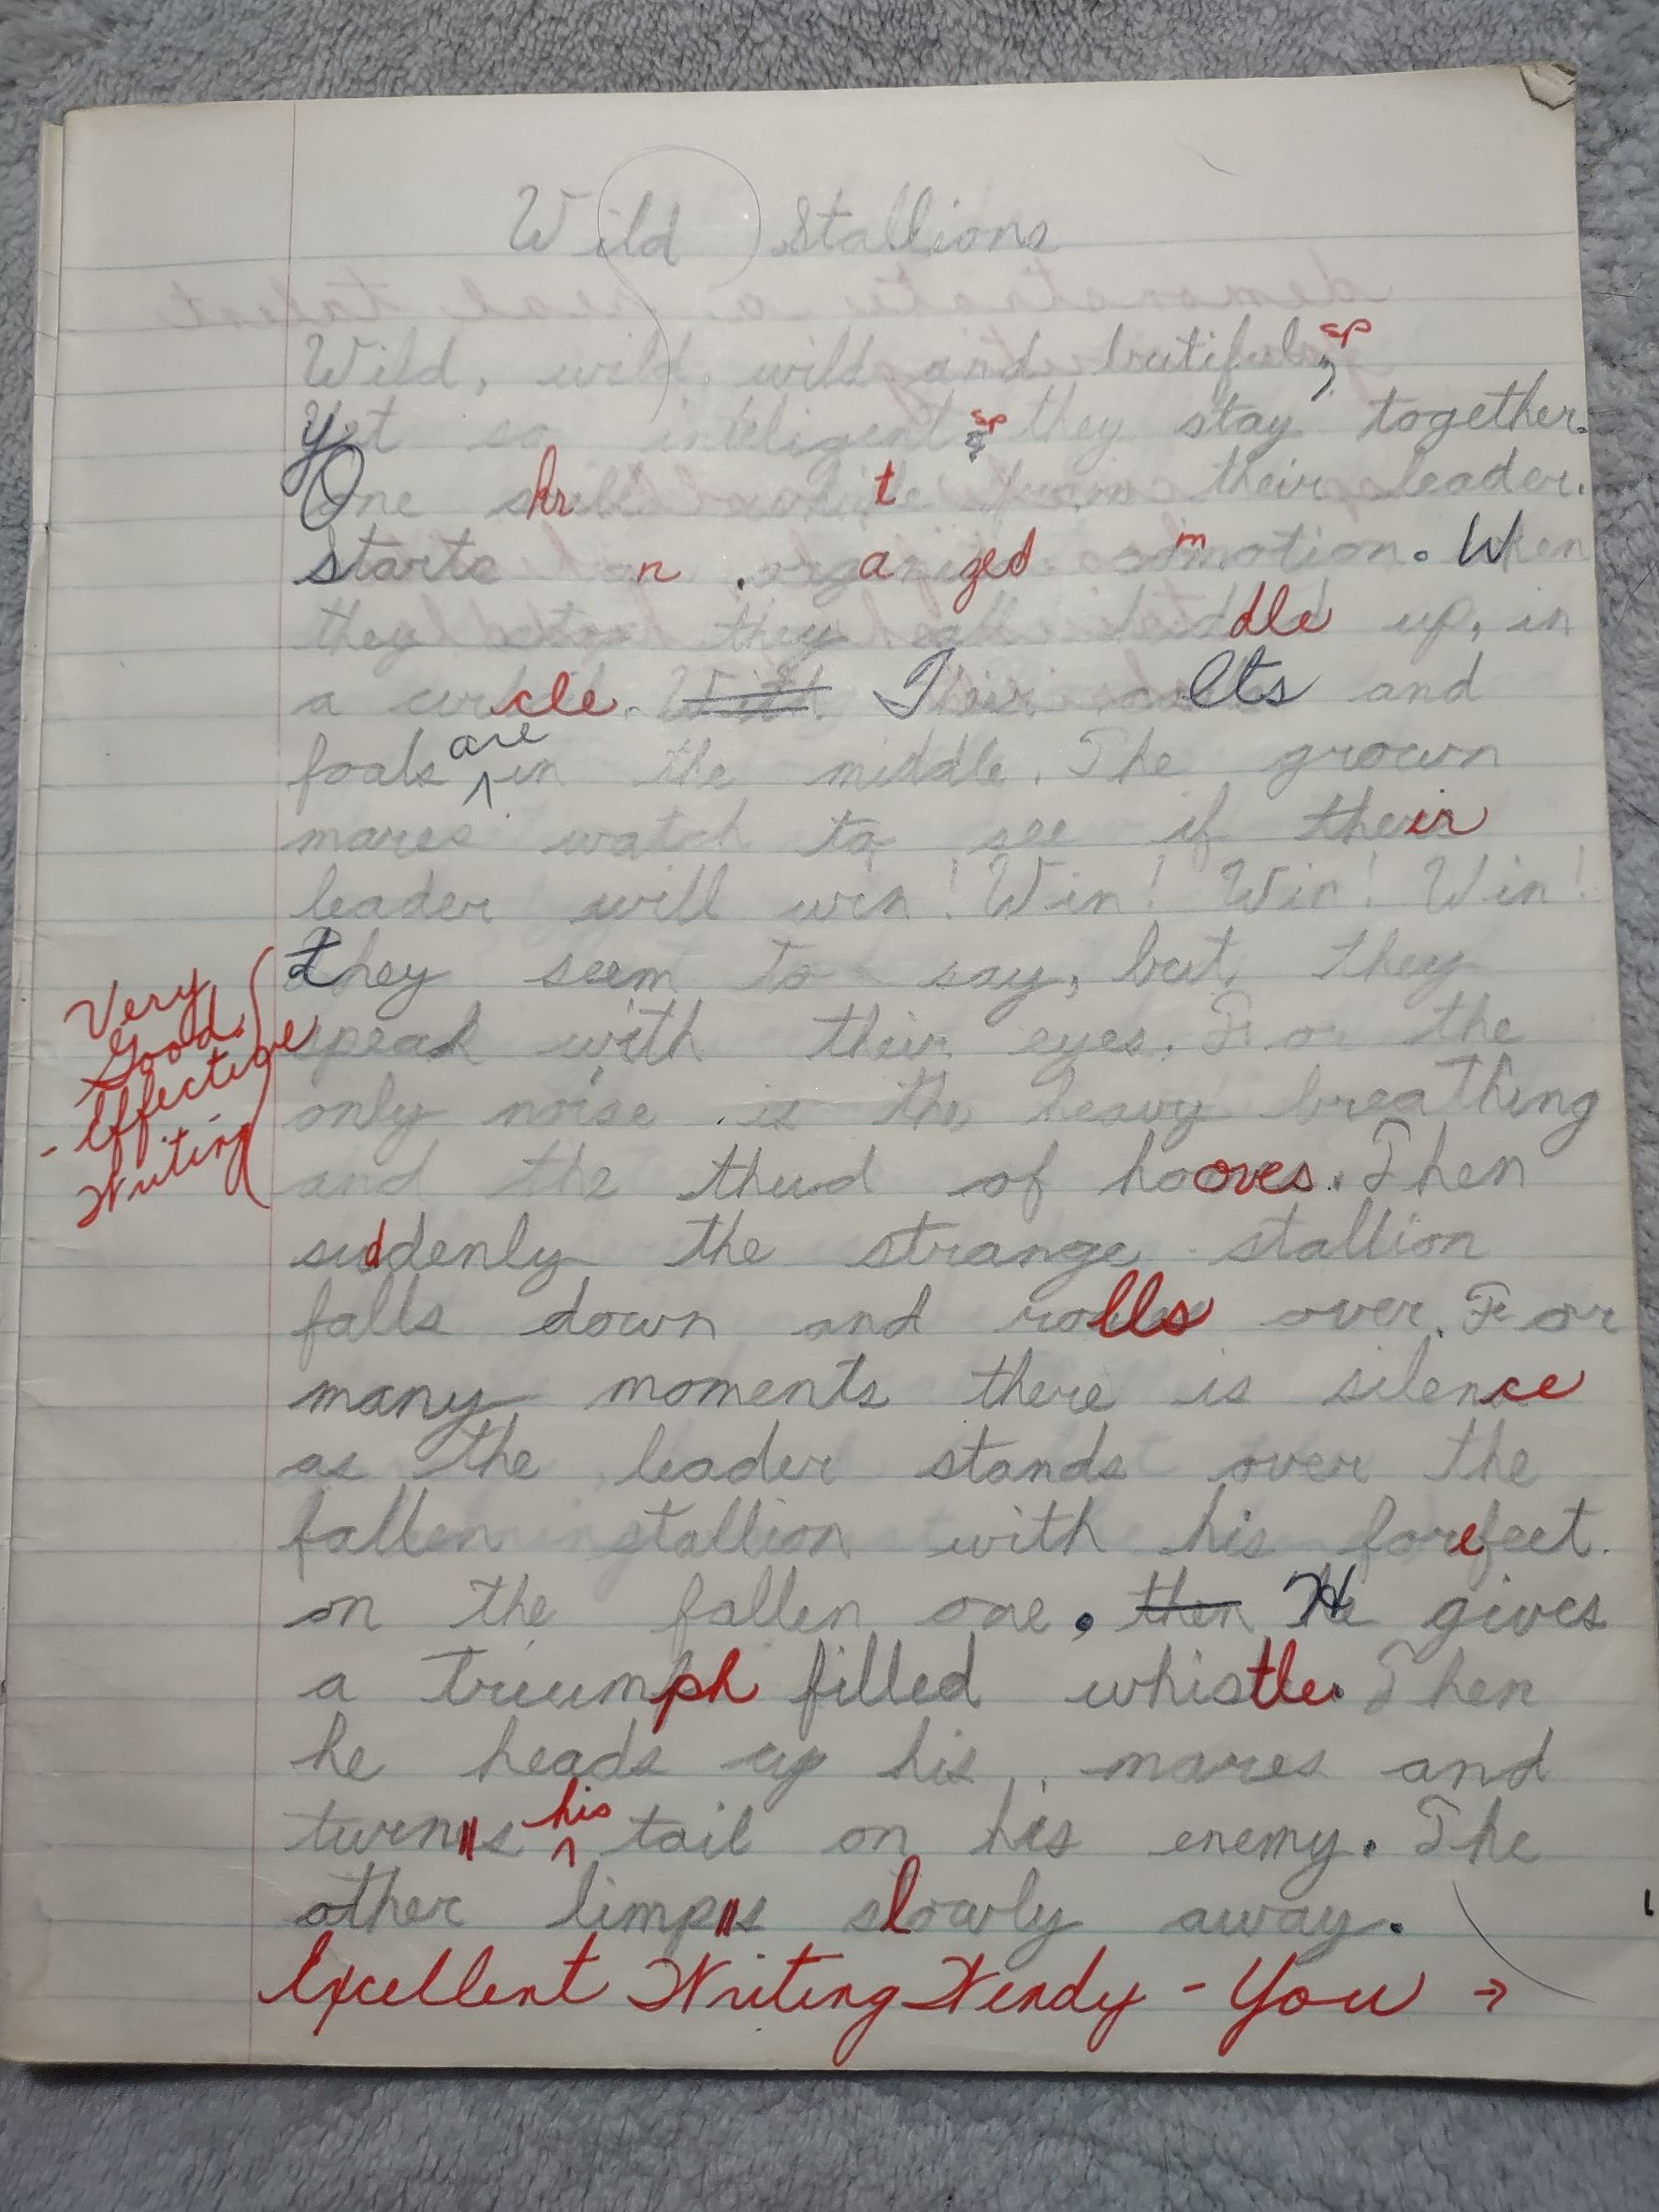 Grade school journal page titled Wild Stallions marked up with red ink and the comment Excellent Writing Wendy